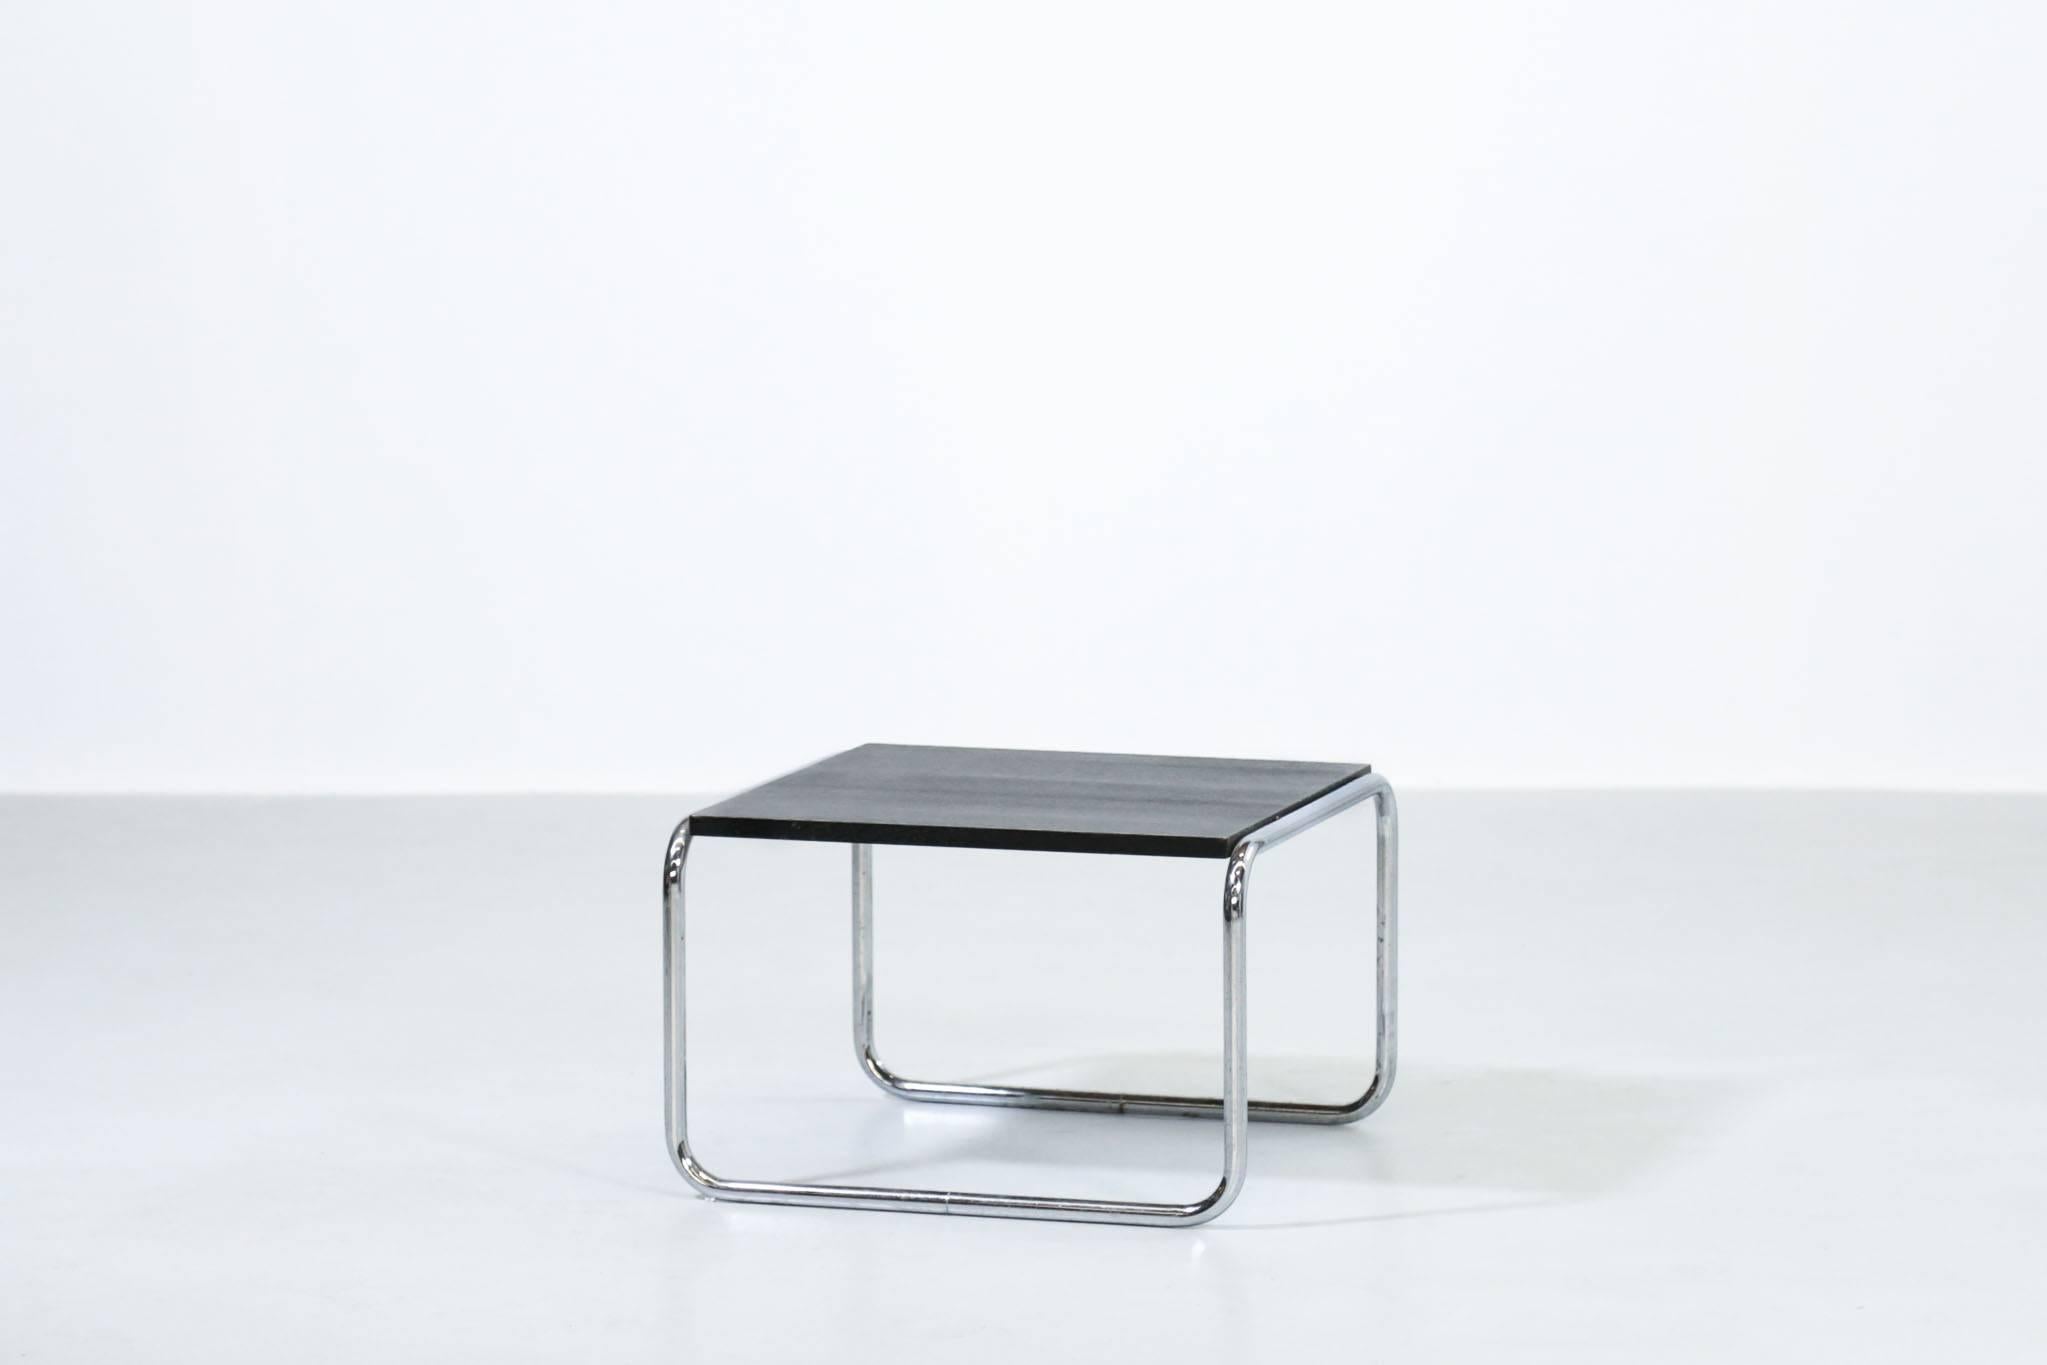 Nice coffee table or side table in the style of Marcel Breuer for Knoll.